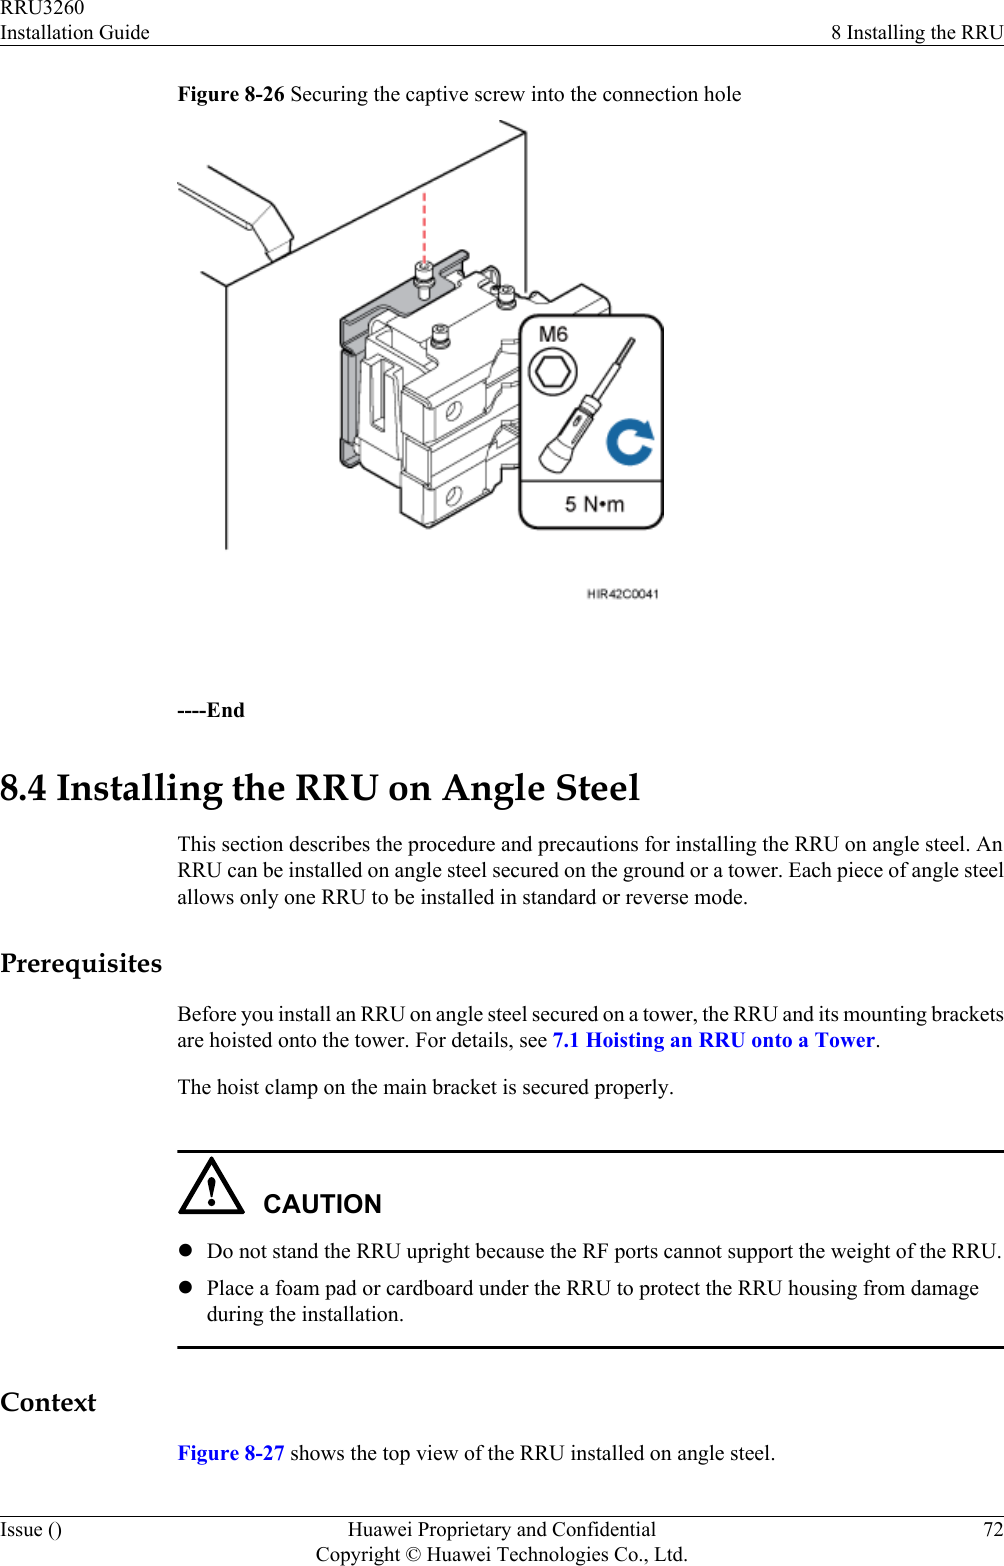 Figure 8-26 Securing the captive screw into the connection hole ----End8.4 Installing the RRU on Angle SteelThis section describes the procedure and precautions for installing the RRU on angle steel. AnRRU can be installed on angle steel secured on the ground or a tower. Each piece of angle steelallows only one RRU to be installed in standard or reverse mode.PrerequisitesBefore you install an RRU on angle steel secured on a tower, the RRU and its mounting bracketsare hoisted onto the tower. For details, see 7.1 Hoisting an RRU onto a Tower.The hoist clamp on the main bracket is secured properly.CAUTIONlDo not stand the RRU upright because the RF ports cannot support the weight of the RRU.lPlace a foam pad or cardboard under the RRU to protect the RRU housing from damageduring the installation.ContextFigure 8-27 shows the top view of the RRU installed on angle steel.RRU3260Installation Guide 8 Installing the RRUIssue () Huawei Proprietary and ConfidentialCopyright © Huawei Technologies Co., Ltd.72